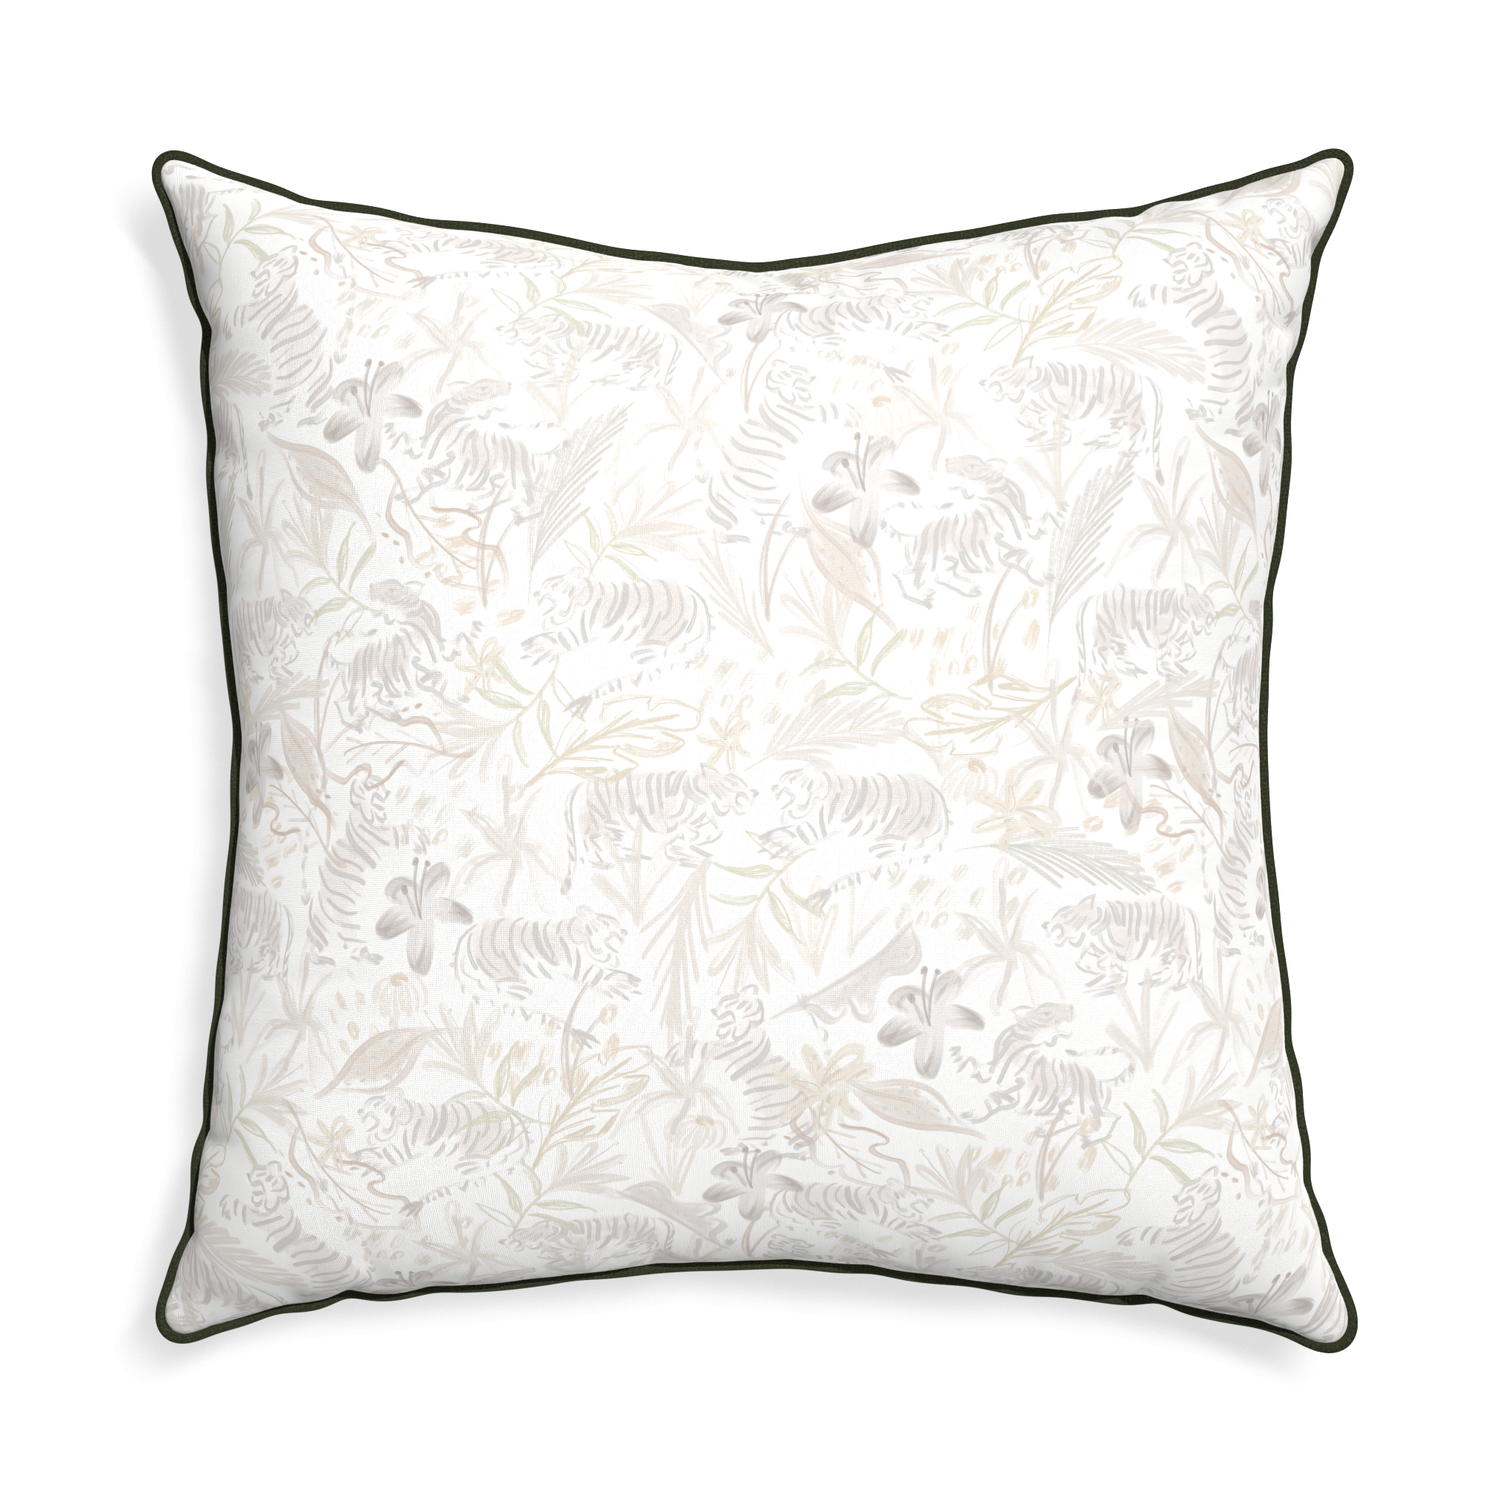 Euro-sham frida sand custom beige chinoiserie tigerpillow with f piping on white background